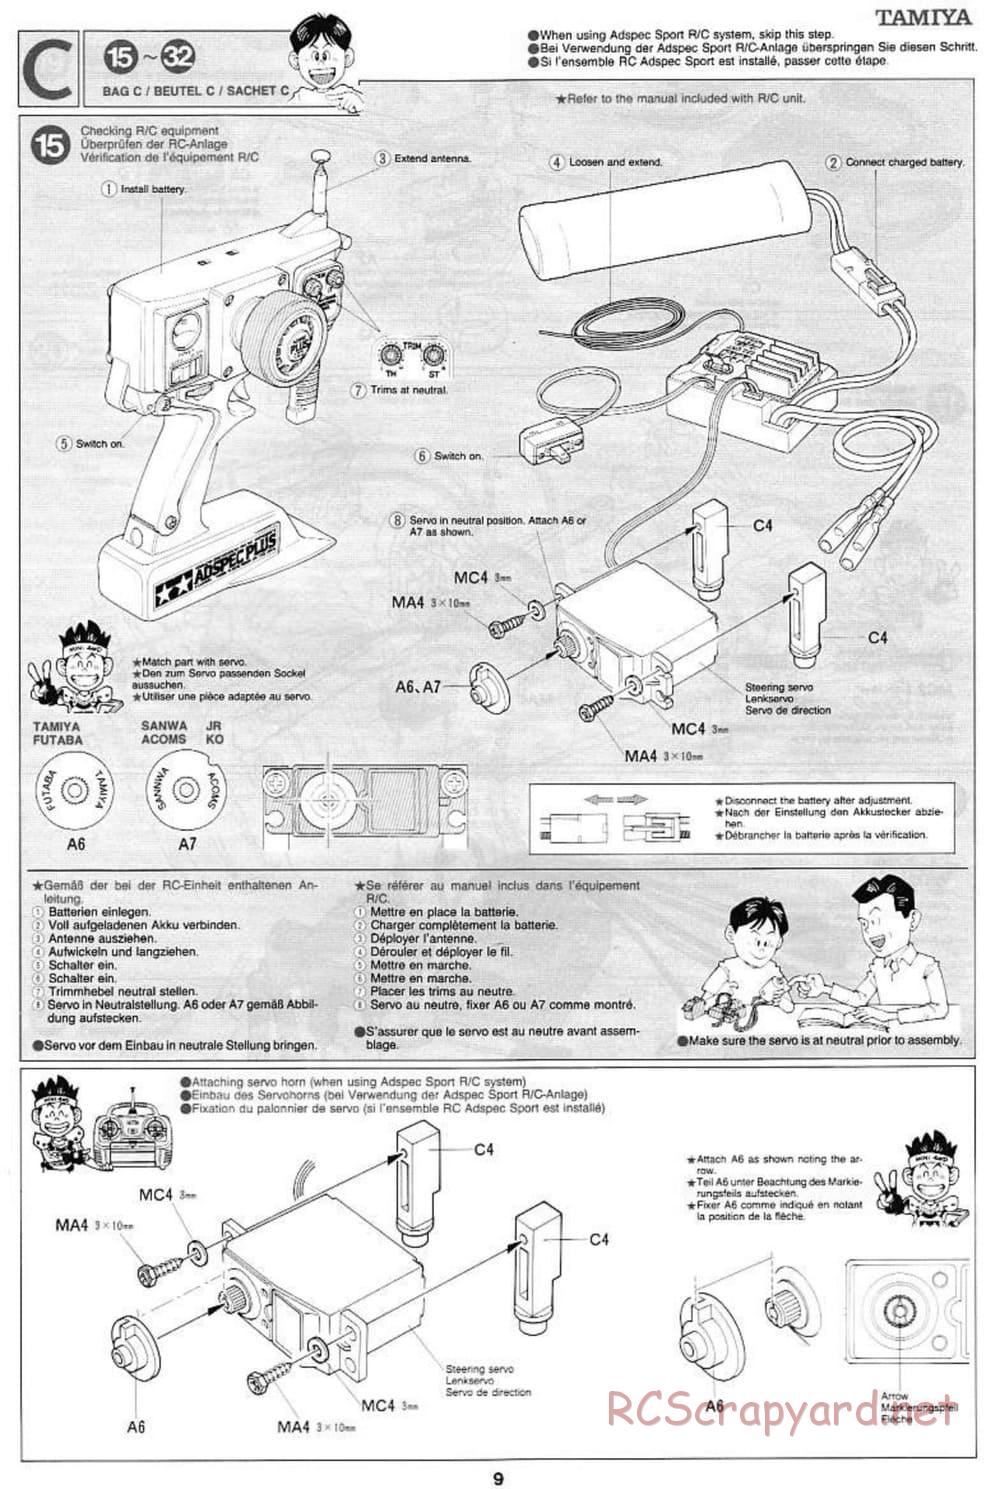 Tamiya - Voltec Fighter - Boy's 4WD Chassis - Manual - Page 9